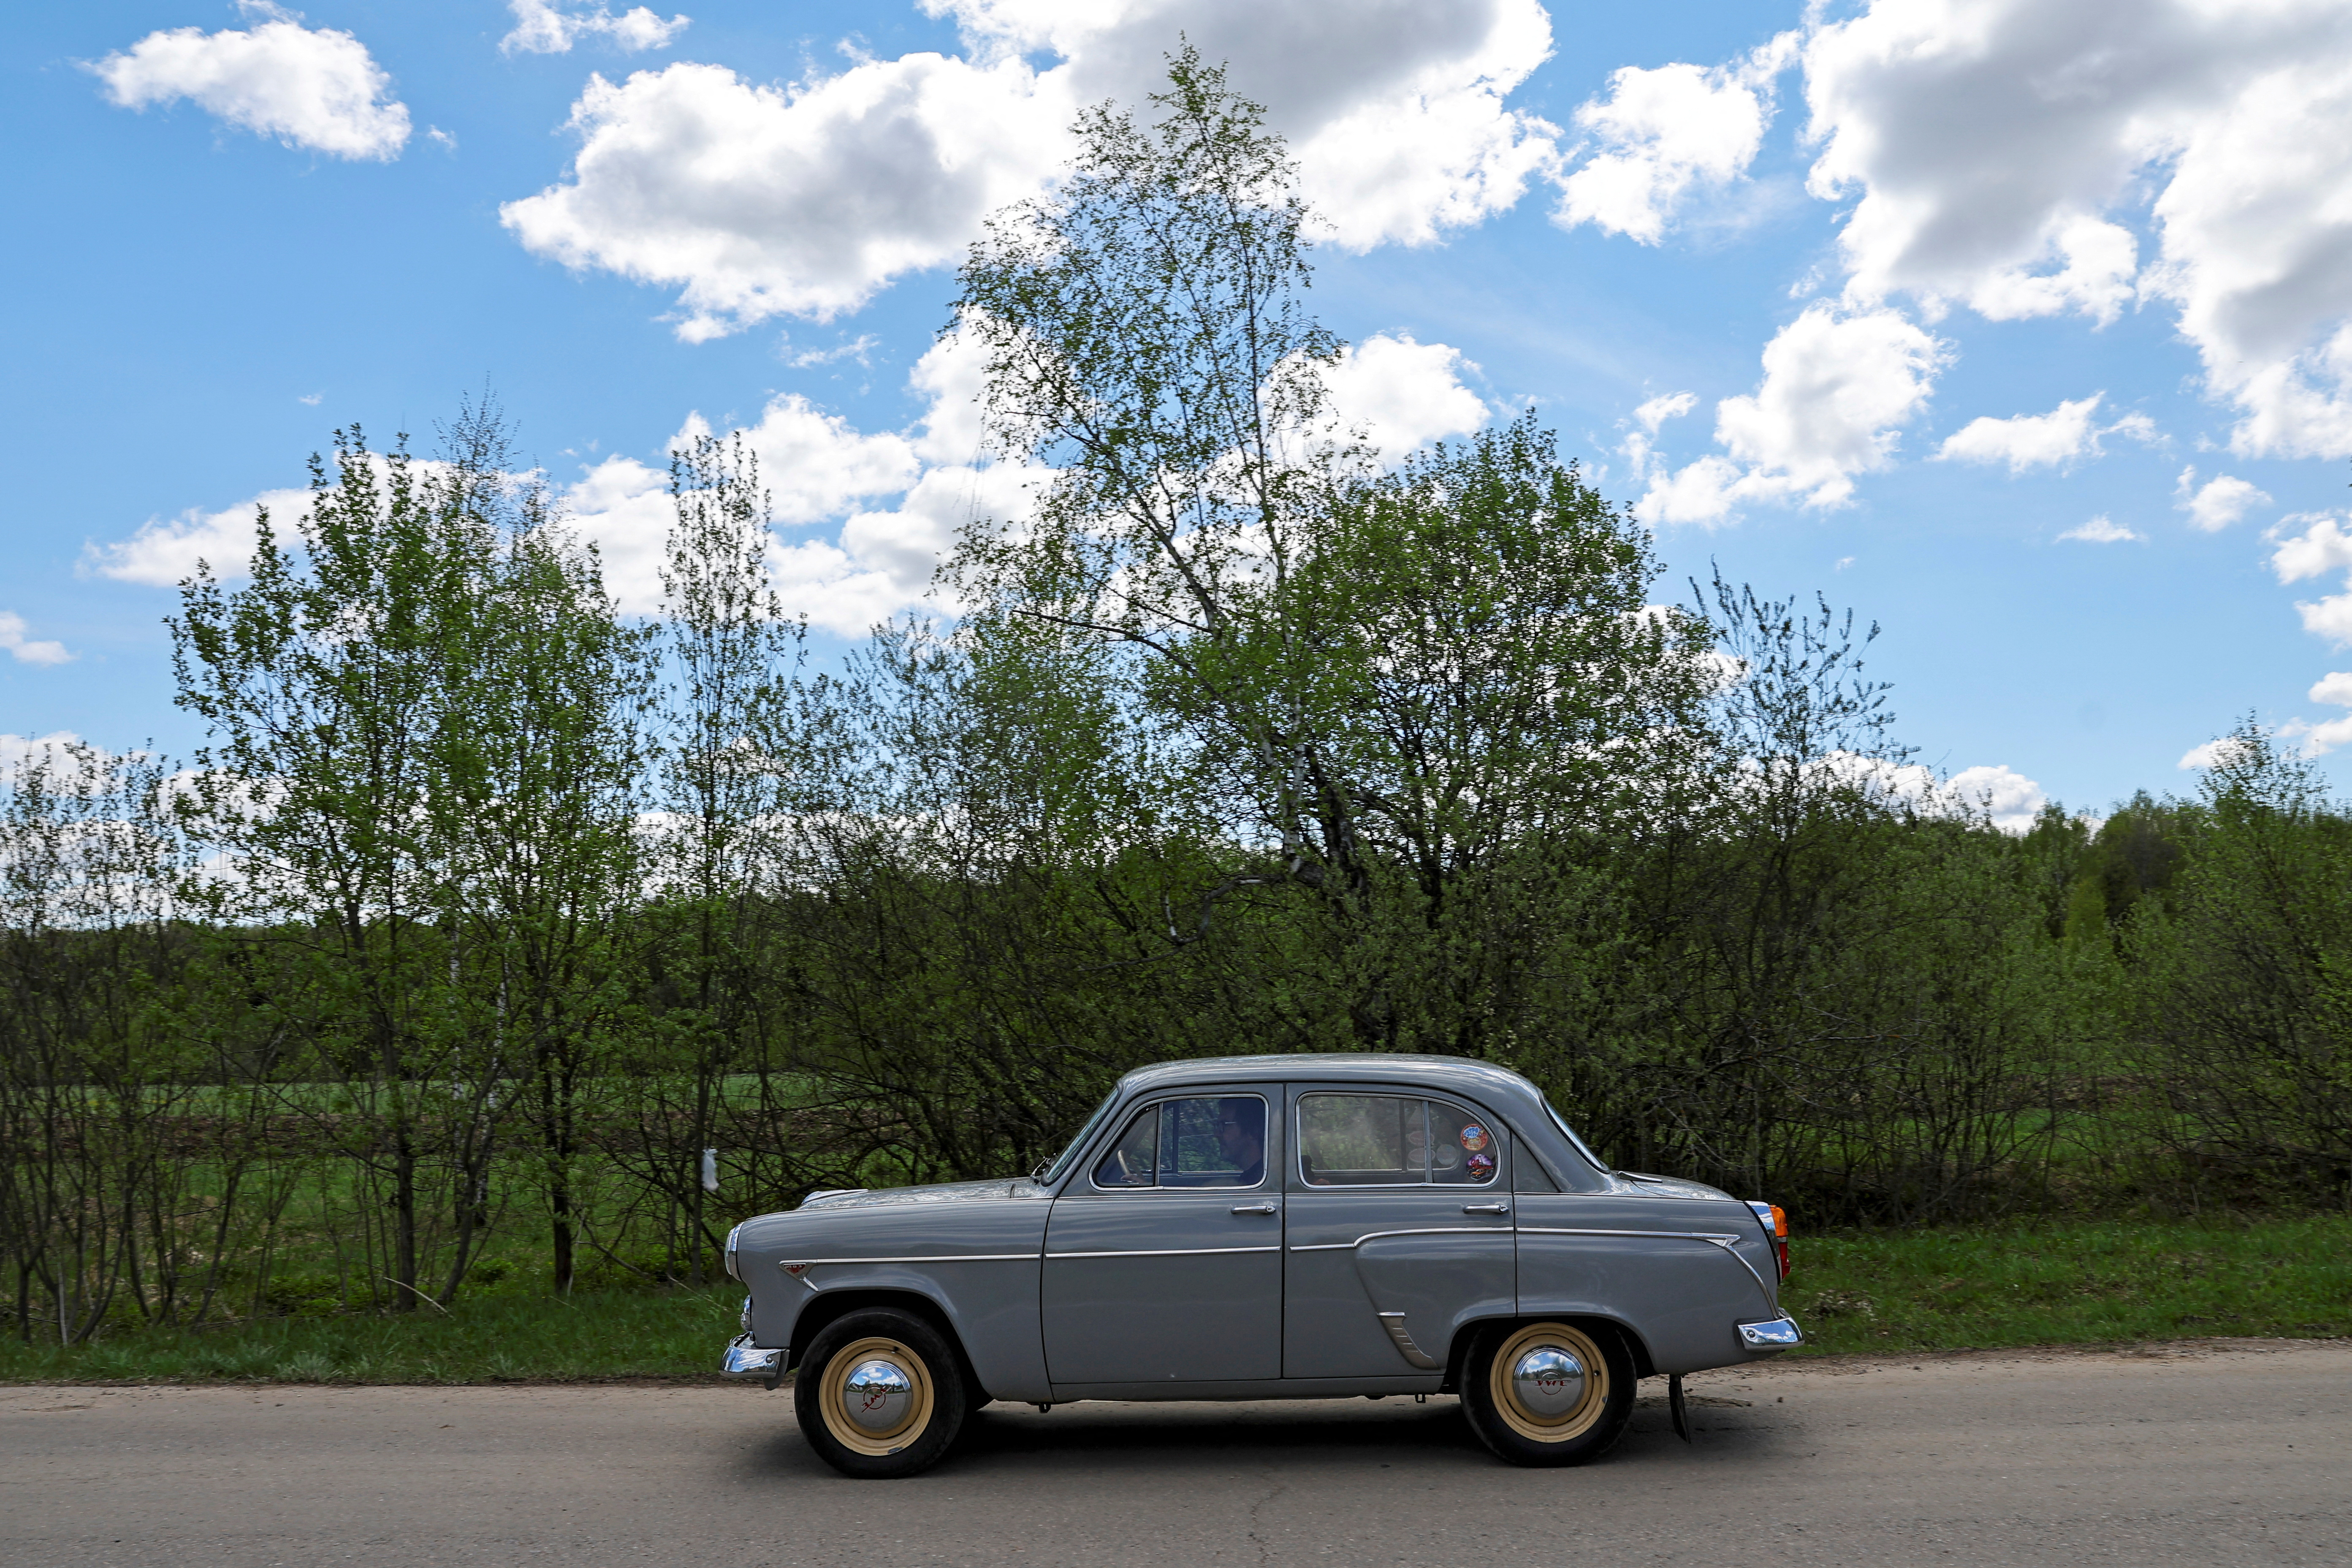 Collector of Moskvich cars Stanislav Tsibulsky drives his Moskvich 403 outside Moscow